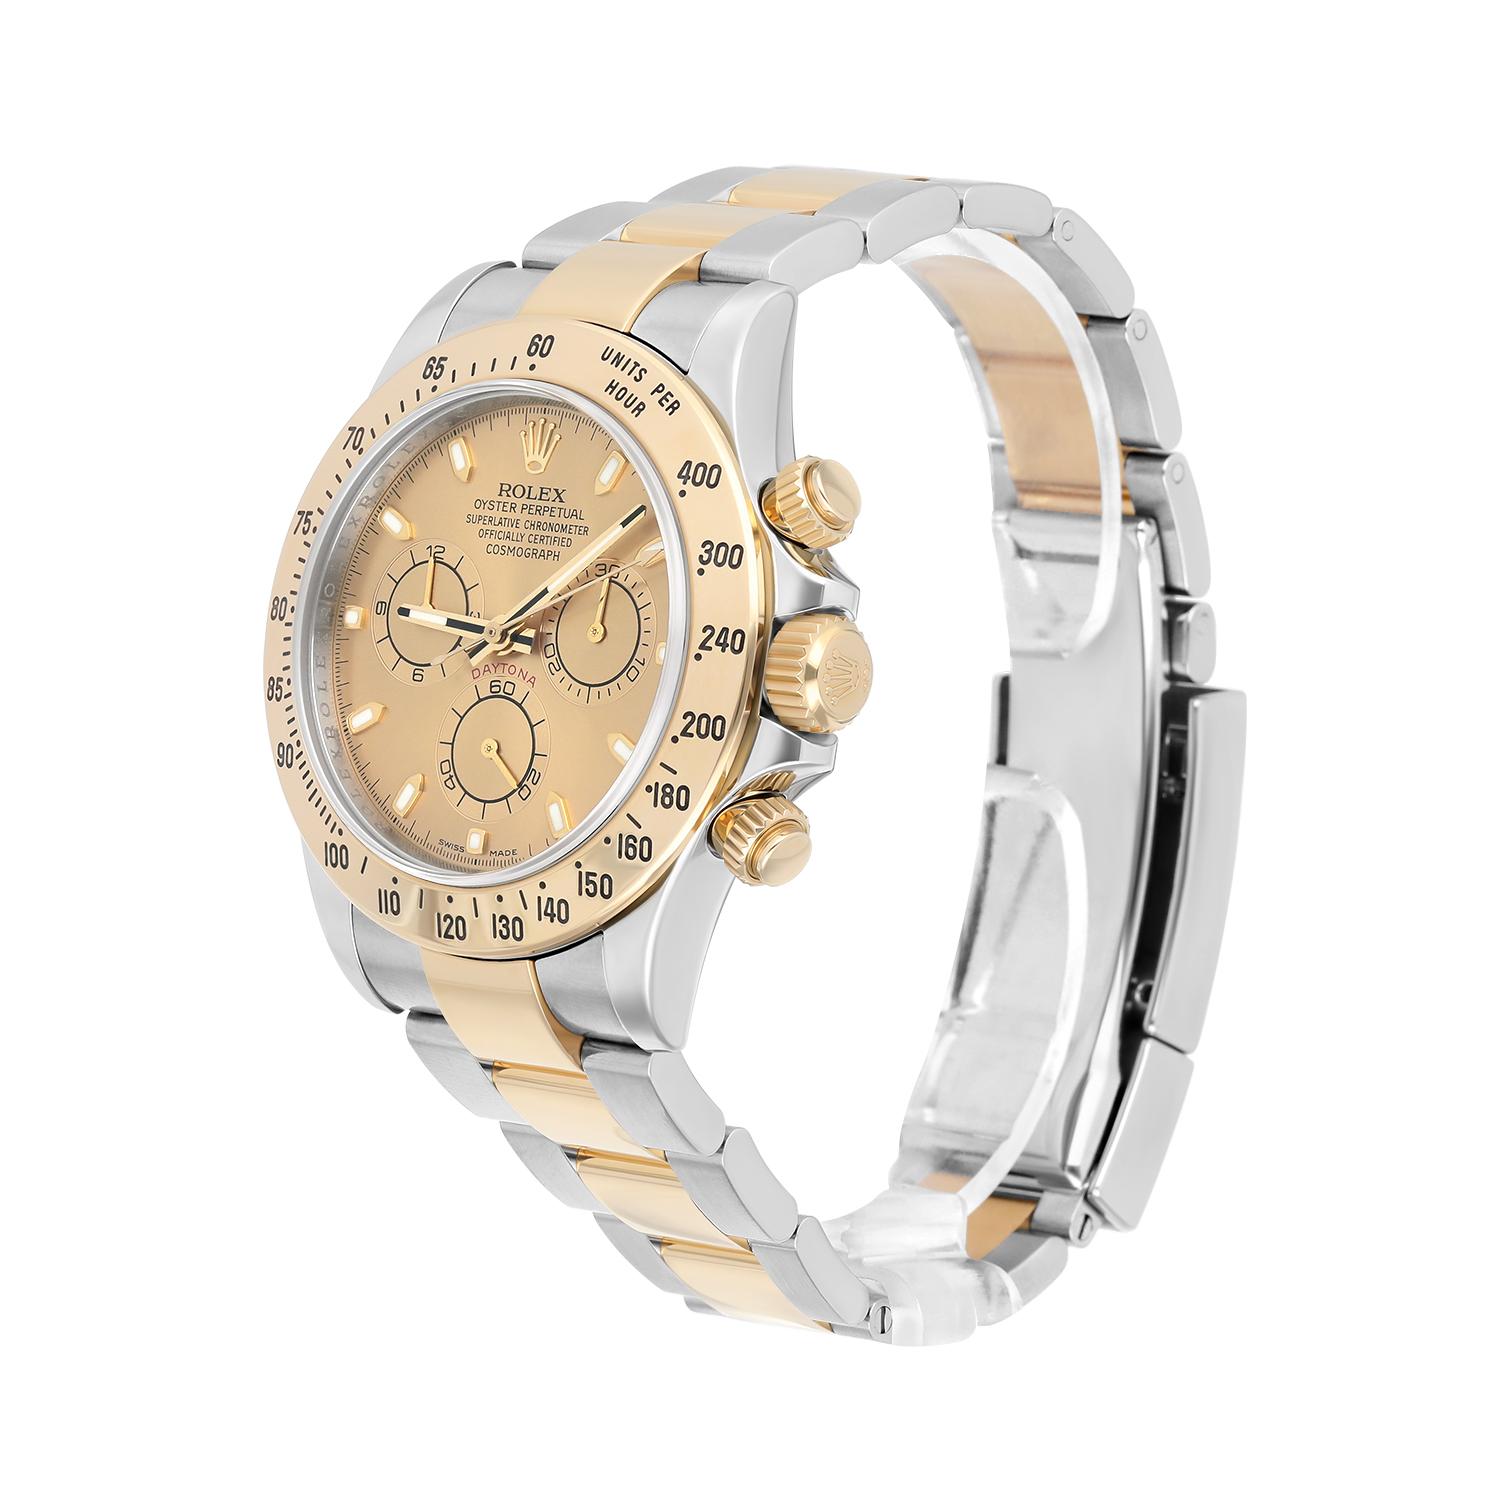 Men's Rolex Daytona Stainless Steel Yellow Gold Champagne Dial Mens Watch 116523 For Sale